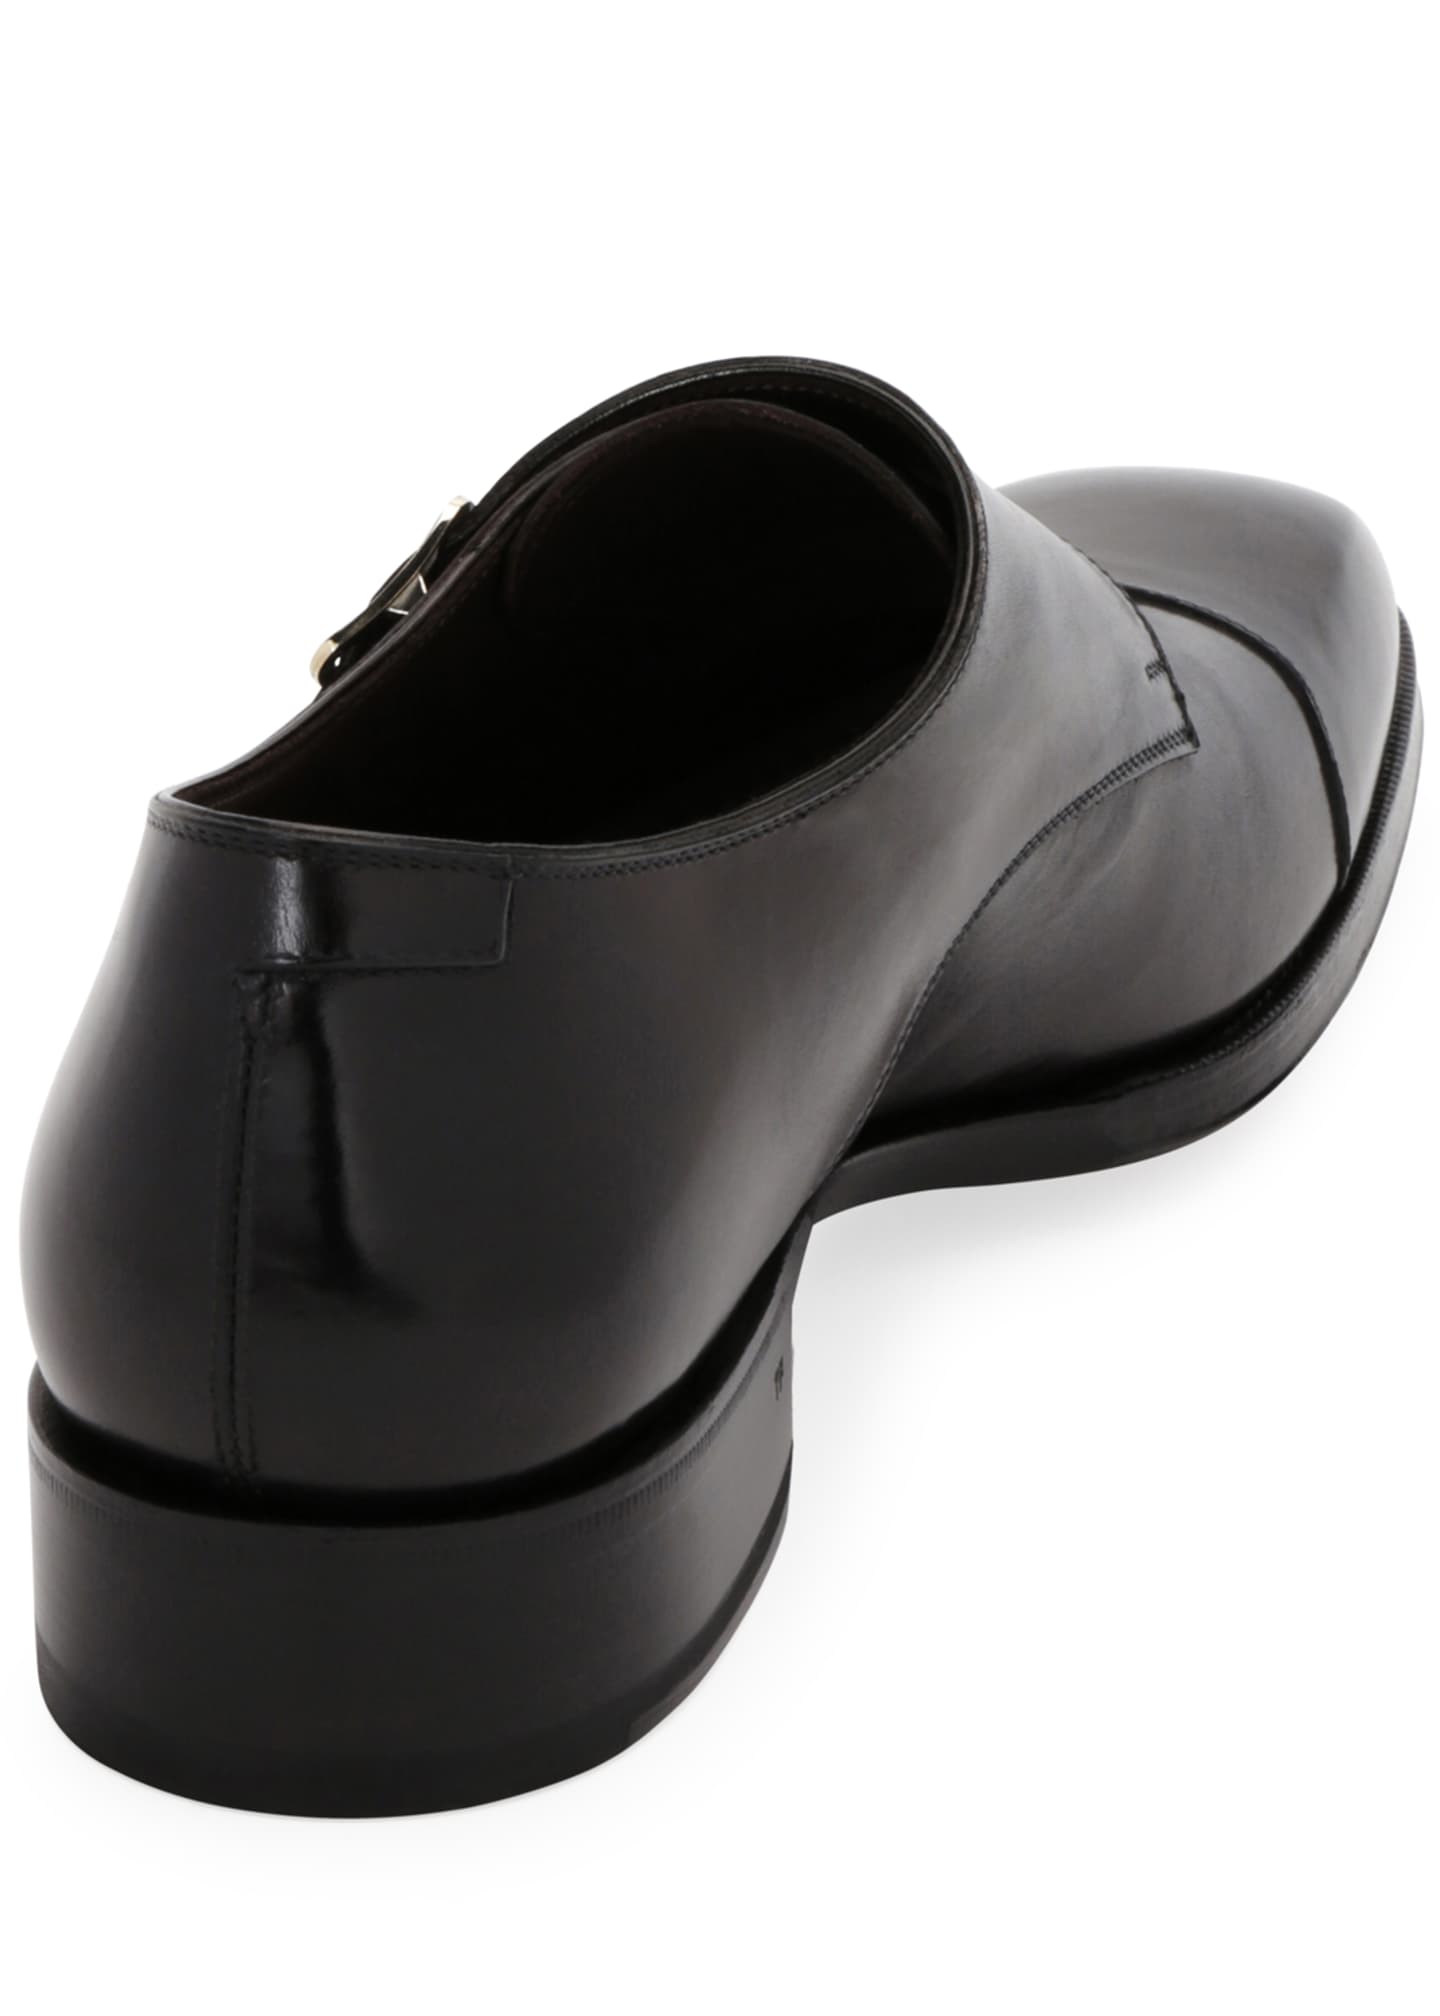 TOM FORD Men's Elkan Double-Monk Leather Loafers - Bergdorf Goodman